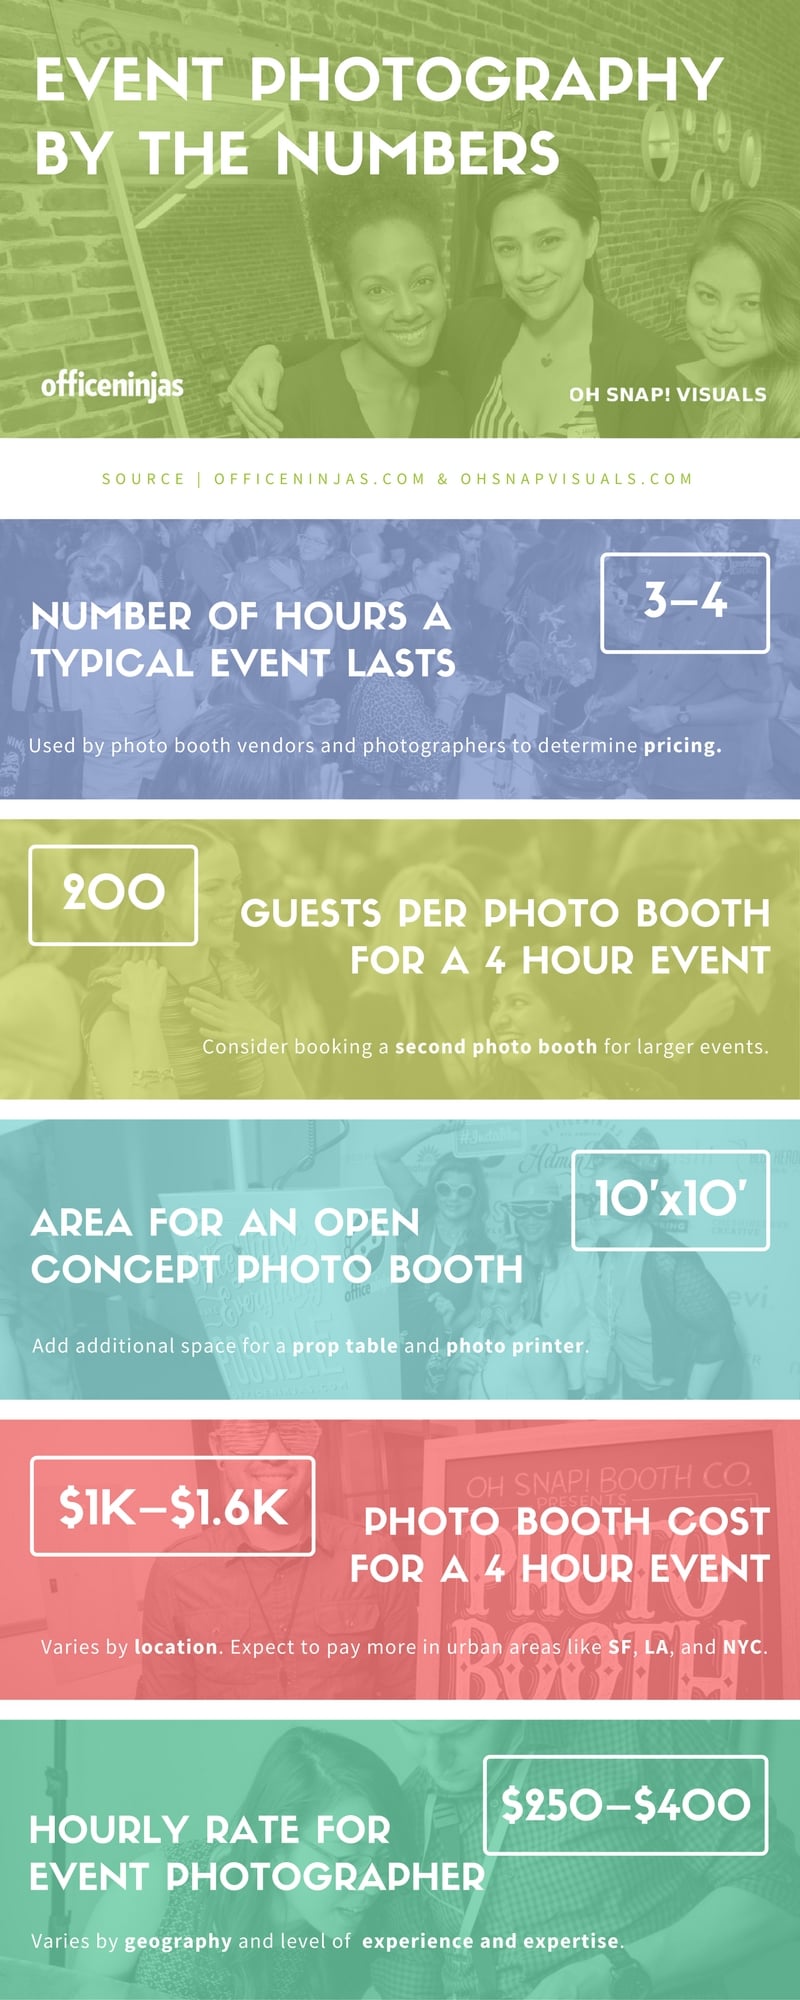 Event Photography Infographic